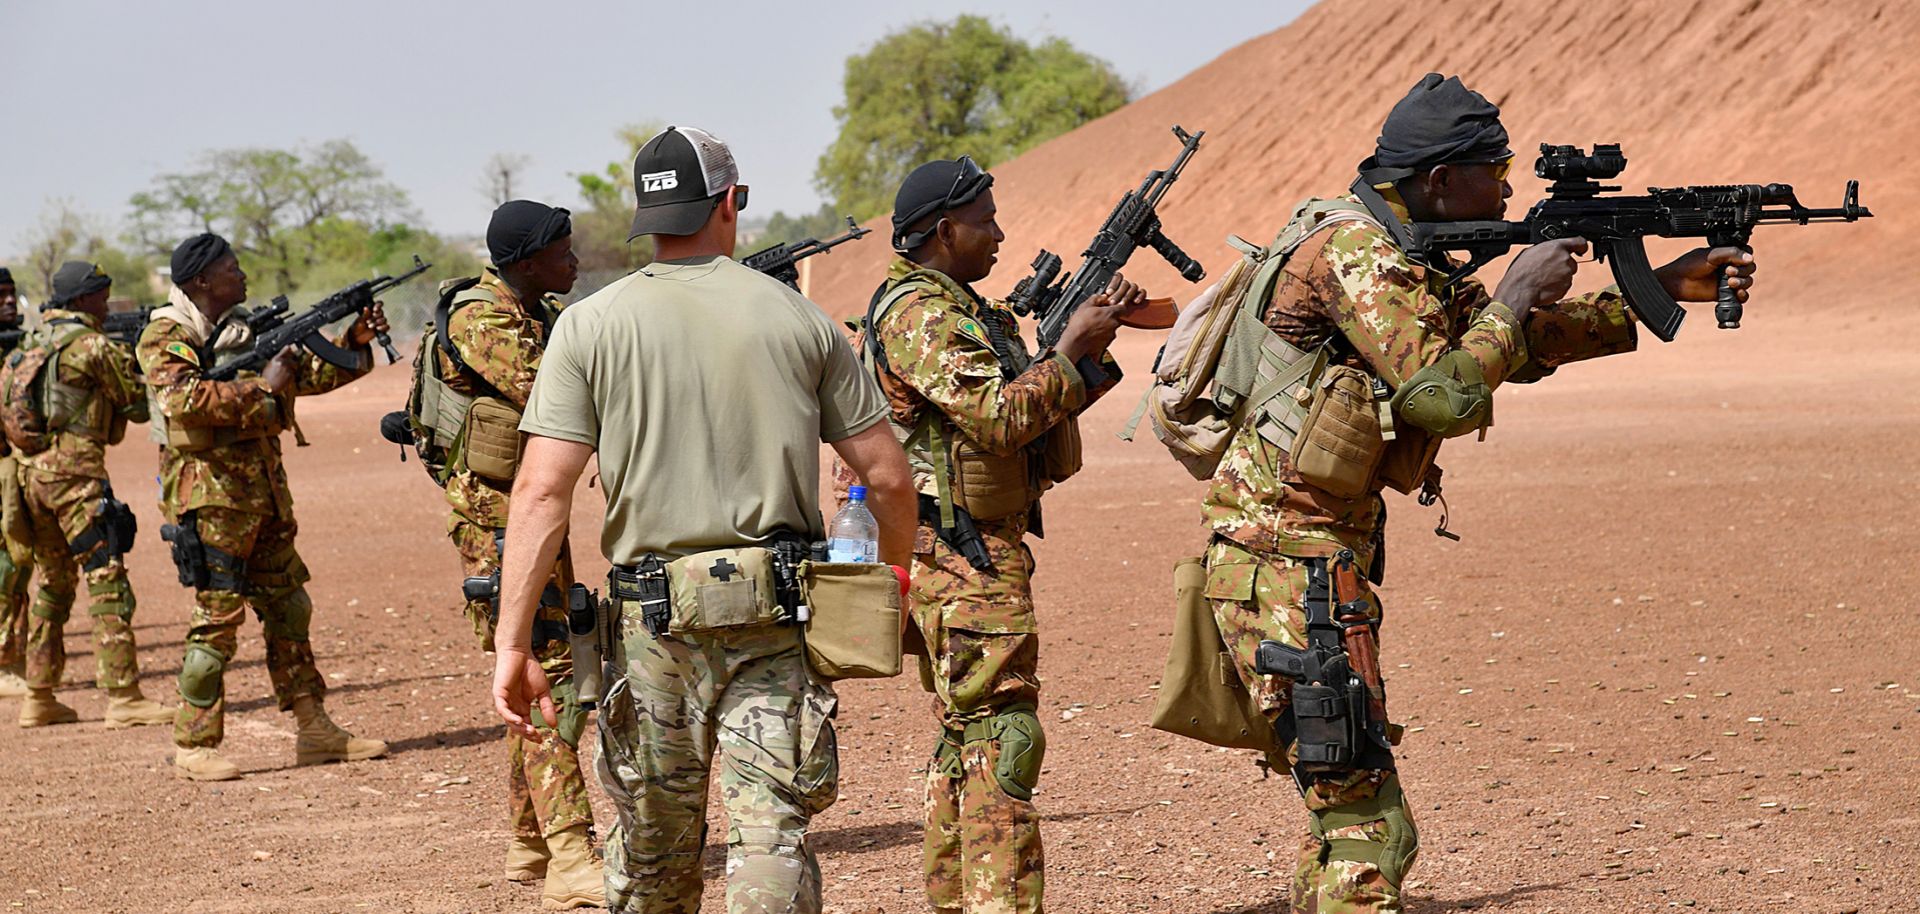 A U.S. Army trainer instructs Malian soldiers on April 12, 2018, during an anti-terrorism exercise at the Kamboinse general Bila Zagre military camp near Ouagadougou, Burkina Faso.